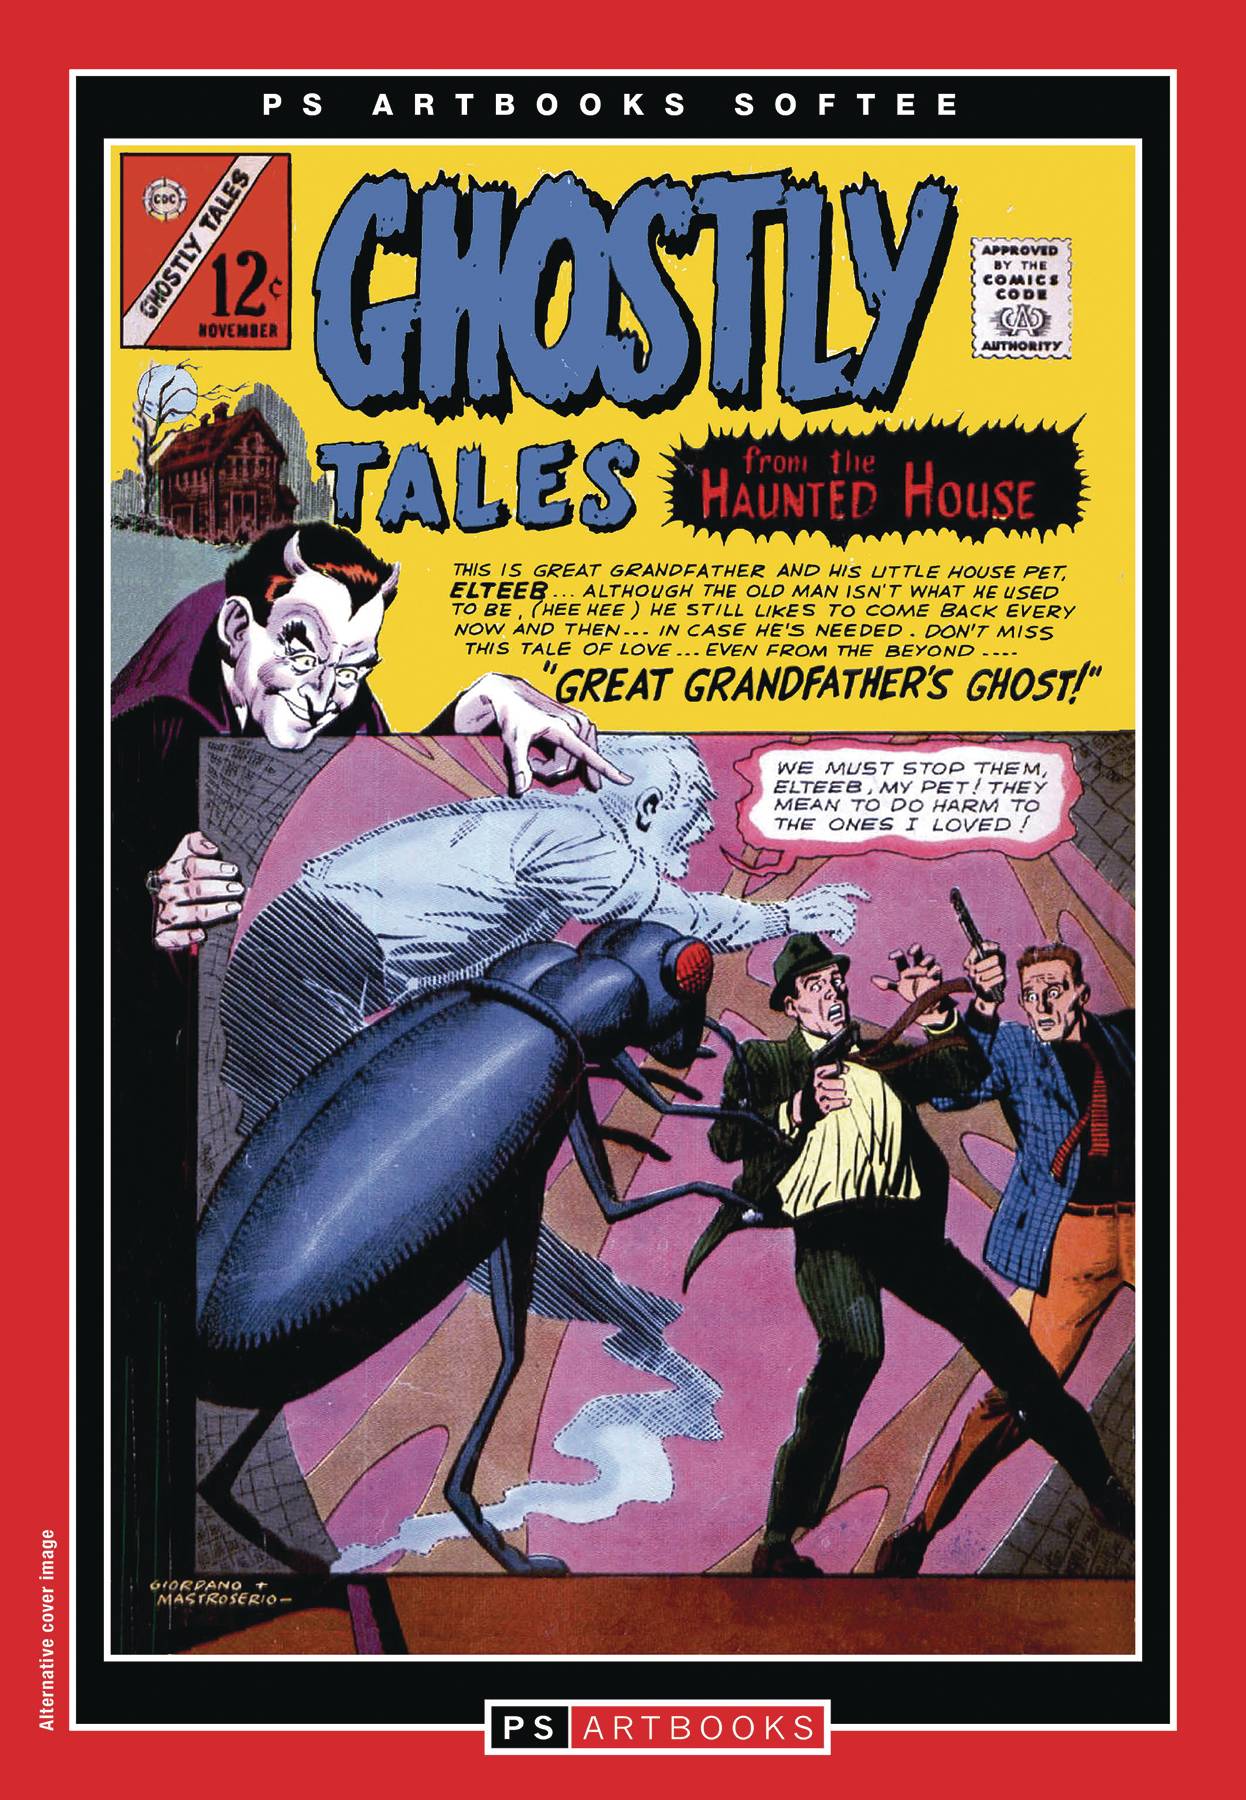 SILVER AGE CLASSICS GHOSTLY TALES SOFTEE TP 01